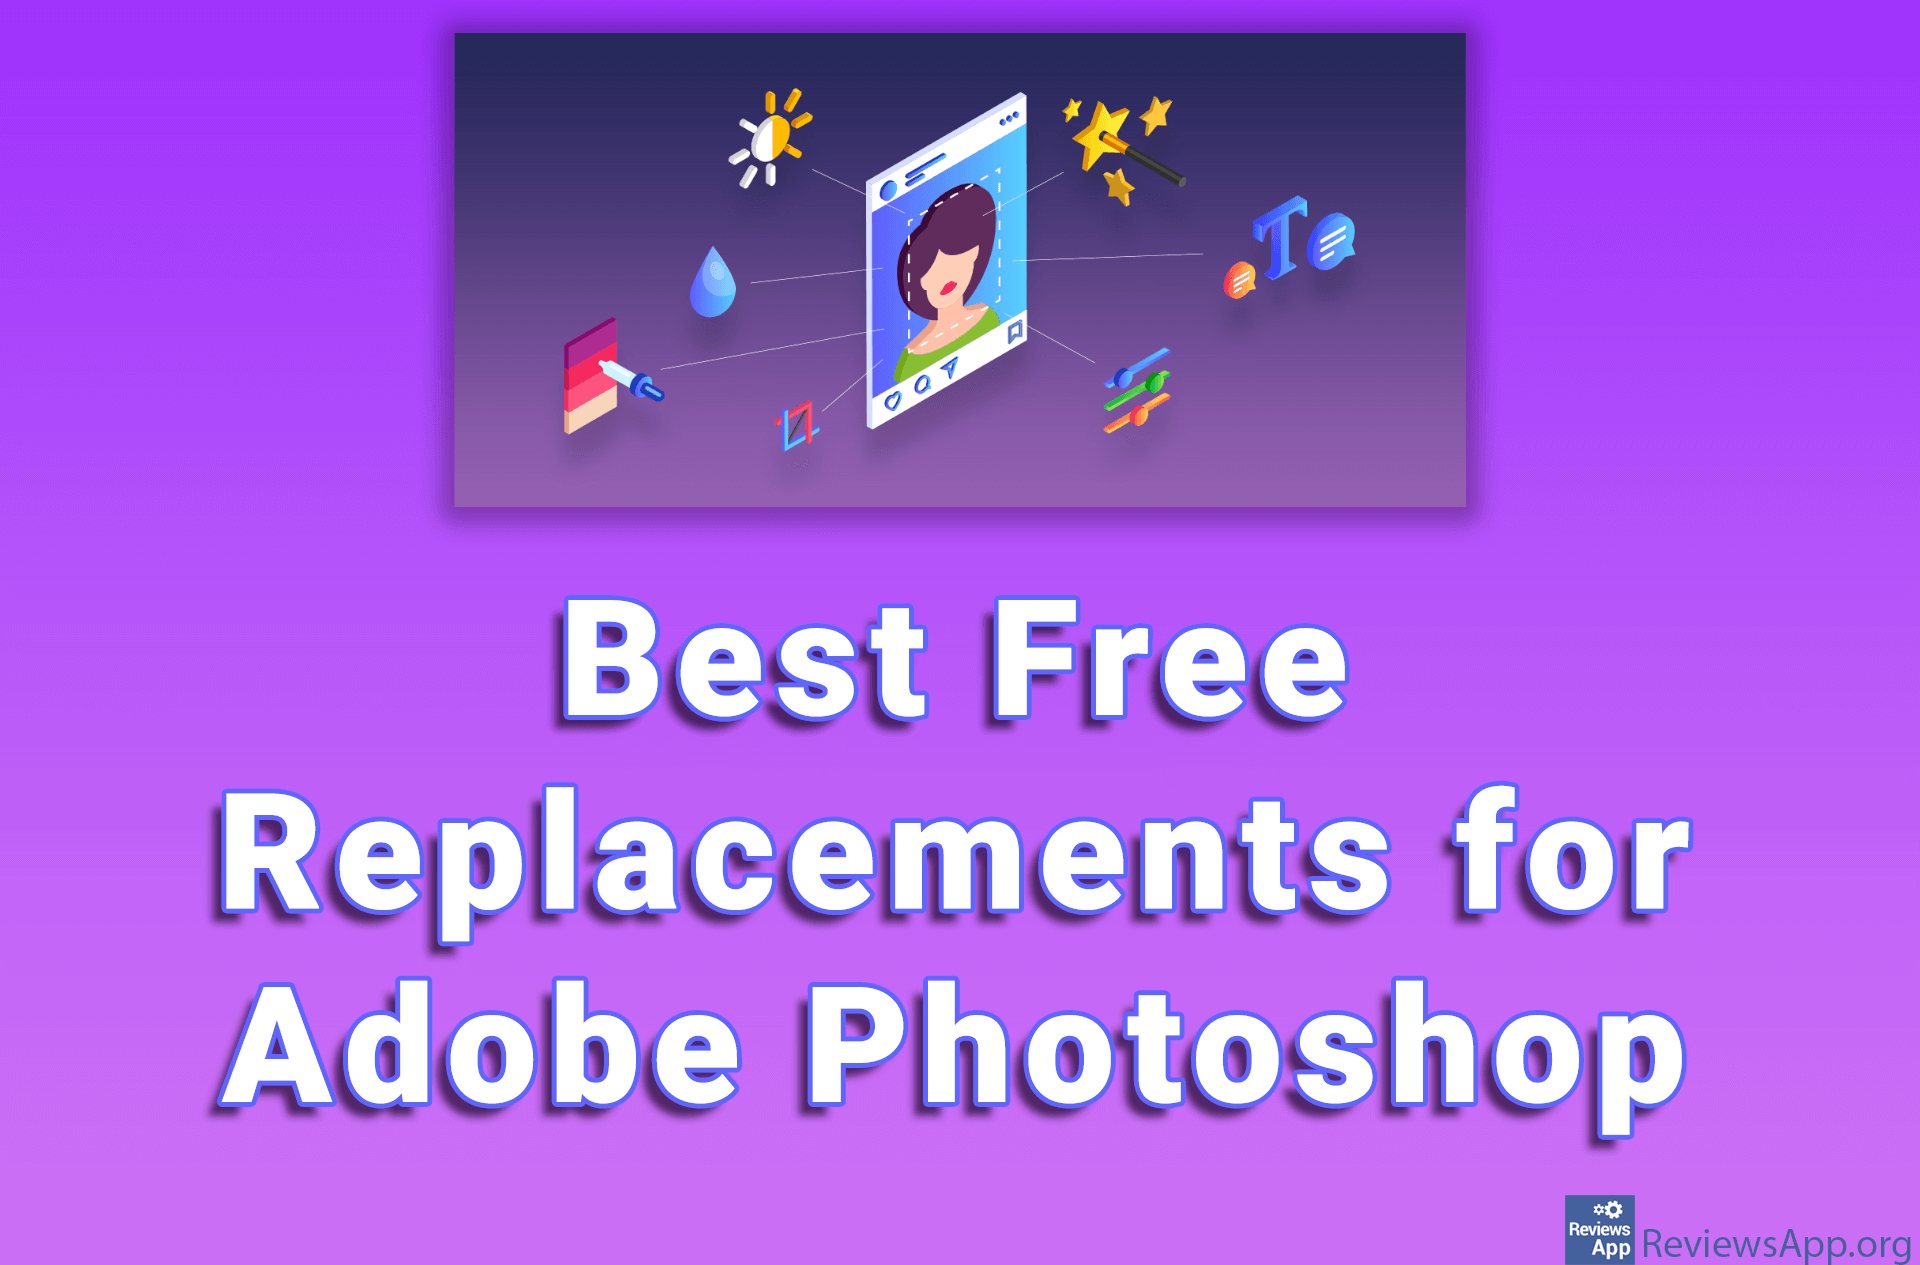 Best Free Replacements for Adobe Photoshop